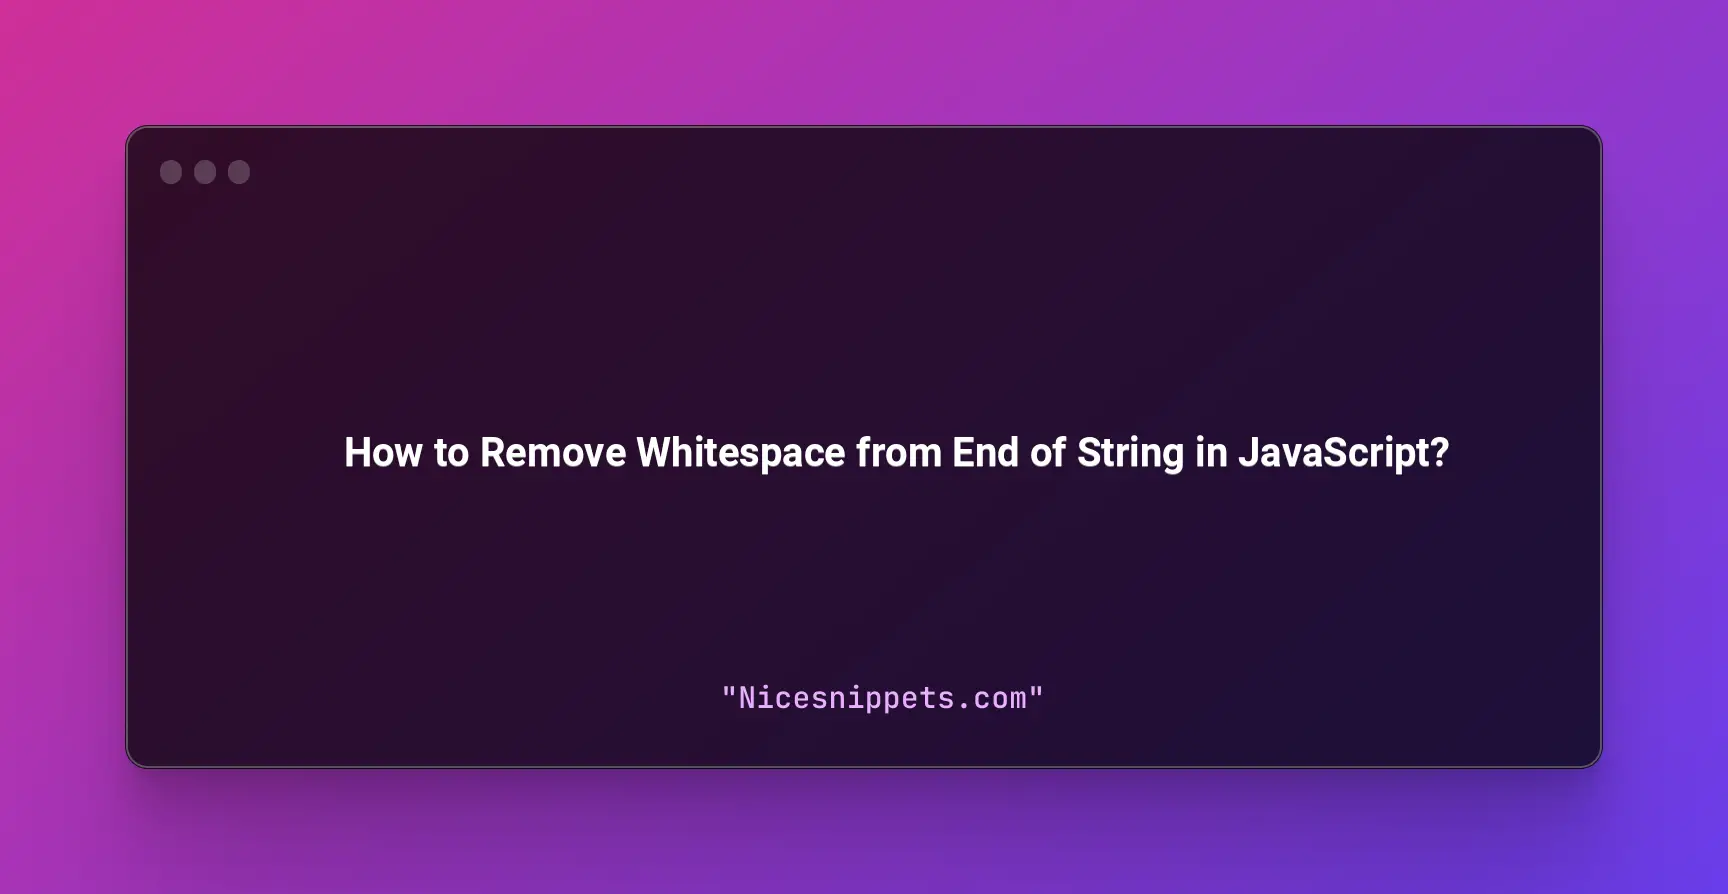 How to Remove Whitespace from End of String in JavaScript?